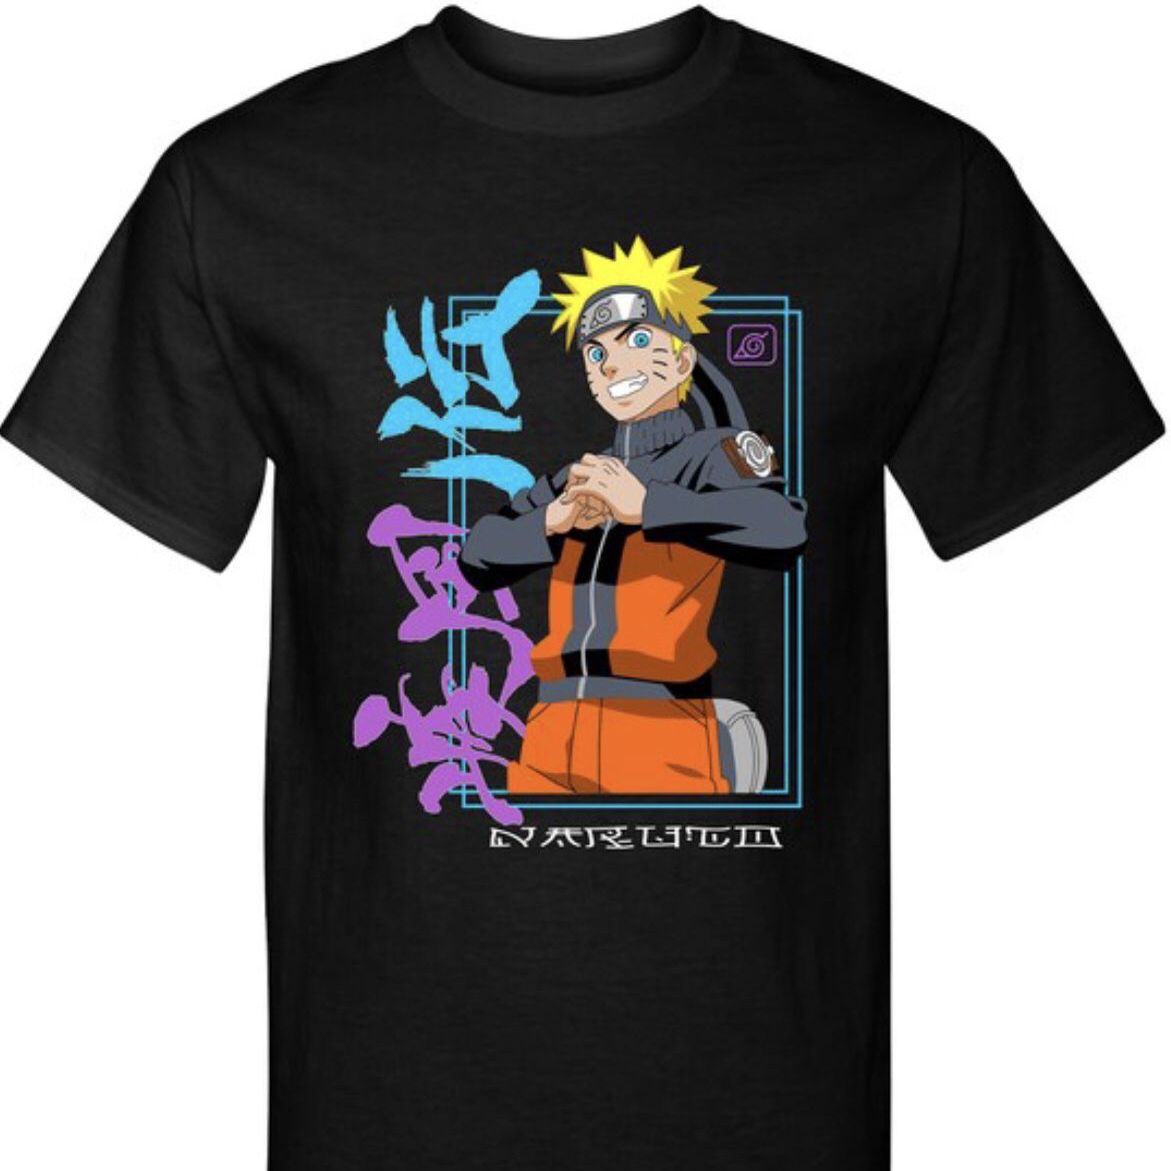 Custom graphic design, anime, cartoon, great quality shirt, trendy, 100% cotton, in black or white t-shirt, sizes: S-2XL, permanent print